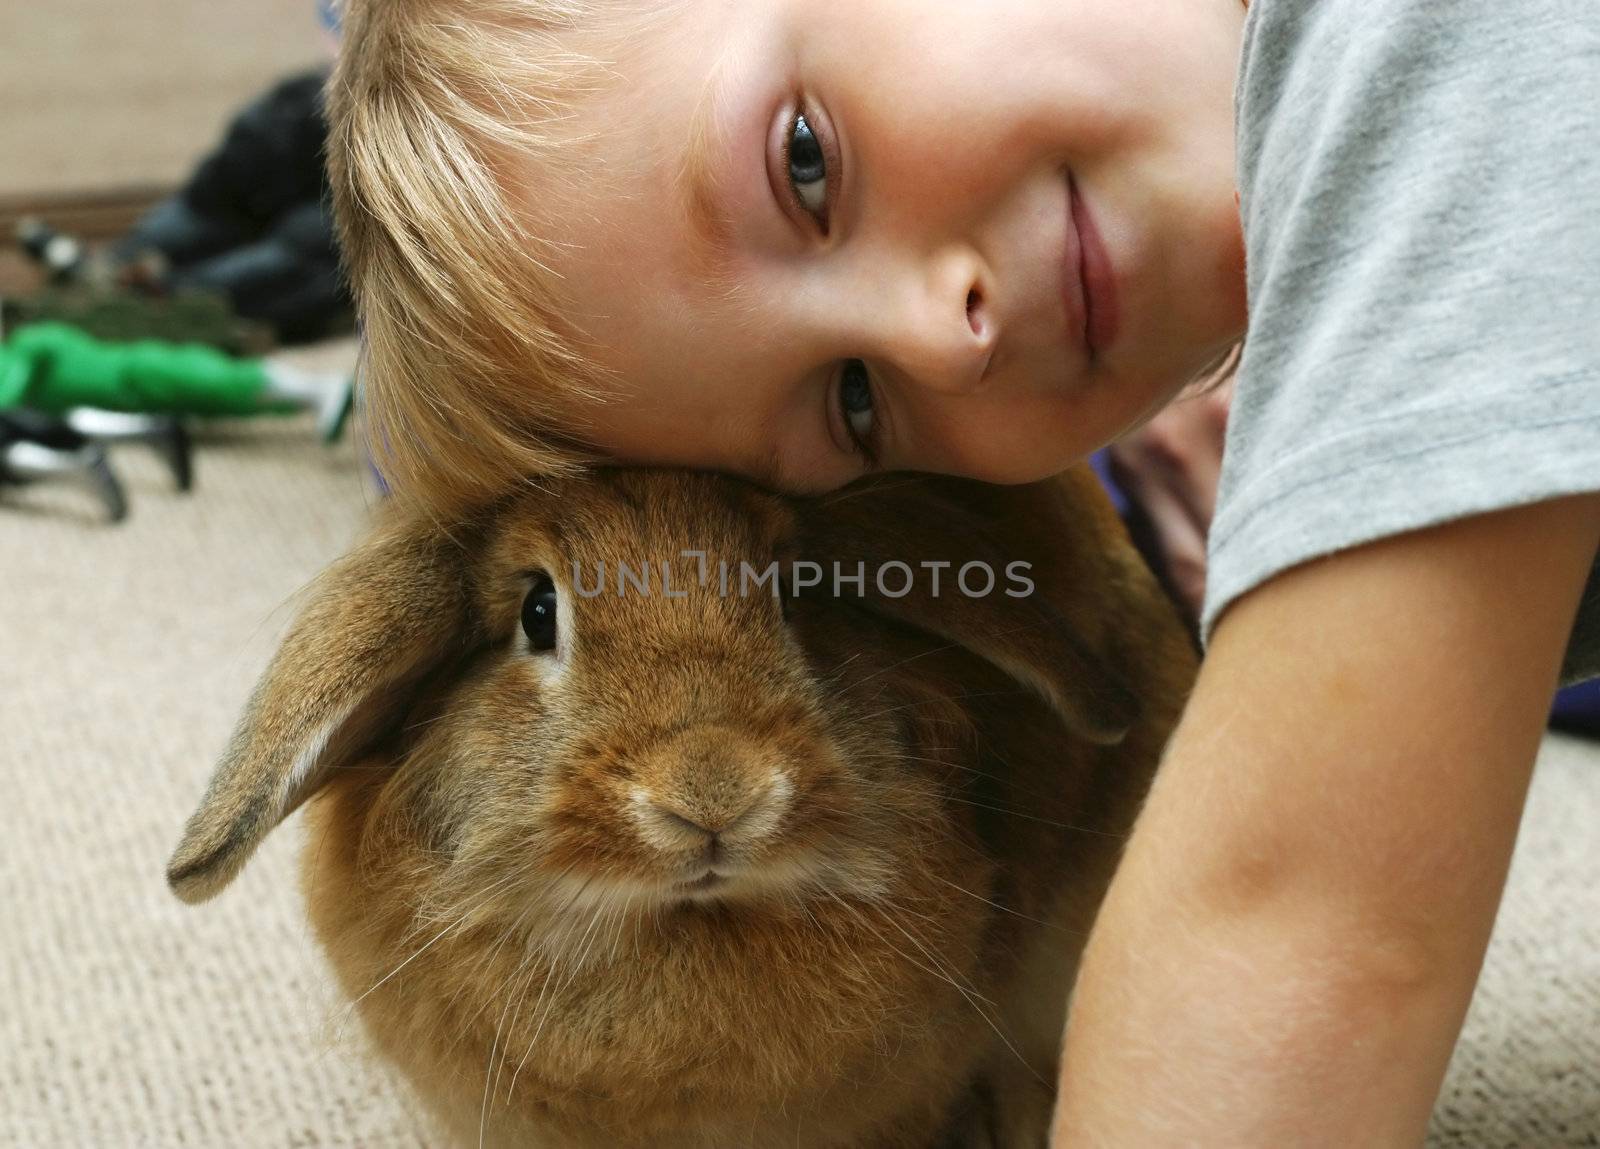 The boy plays with the rabbit